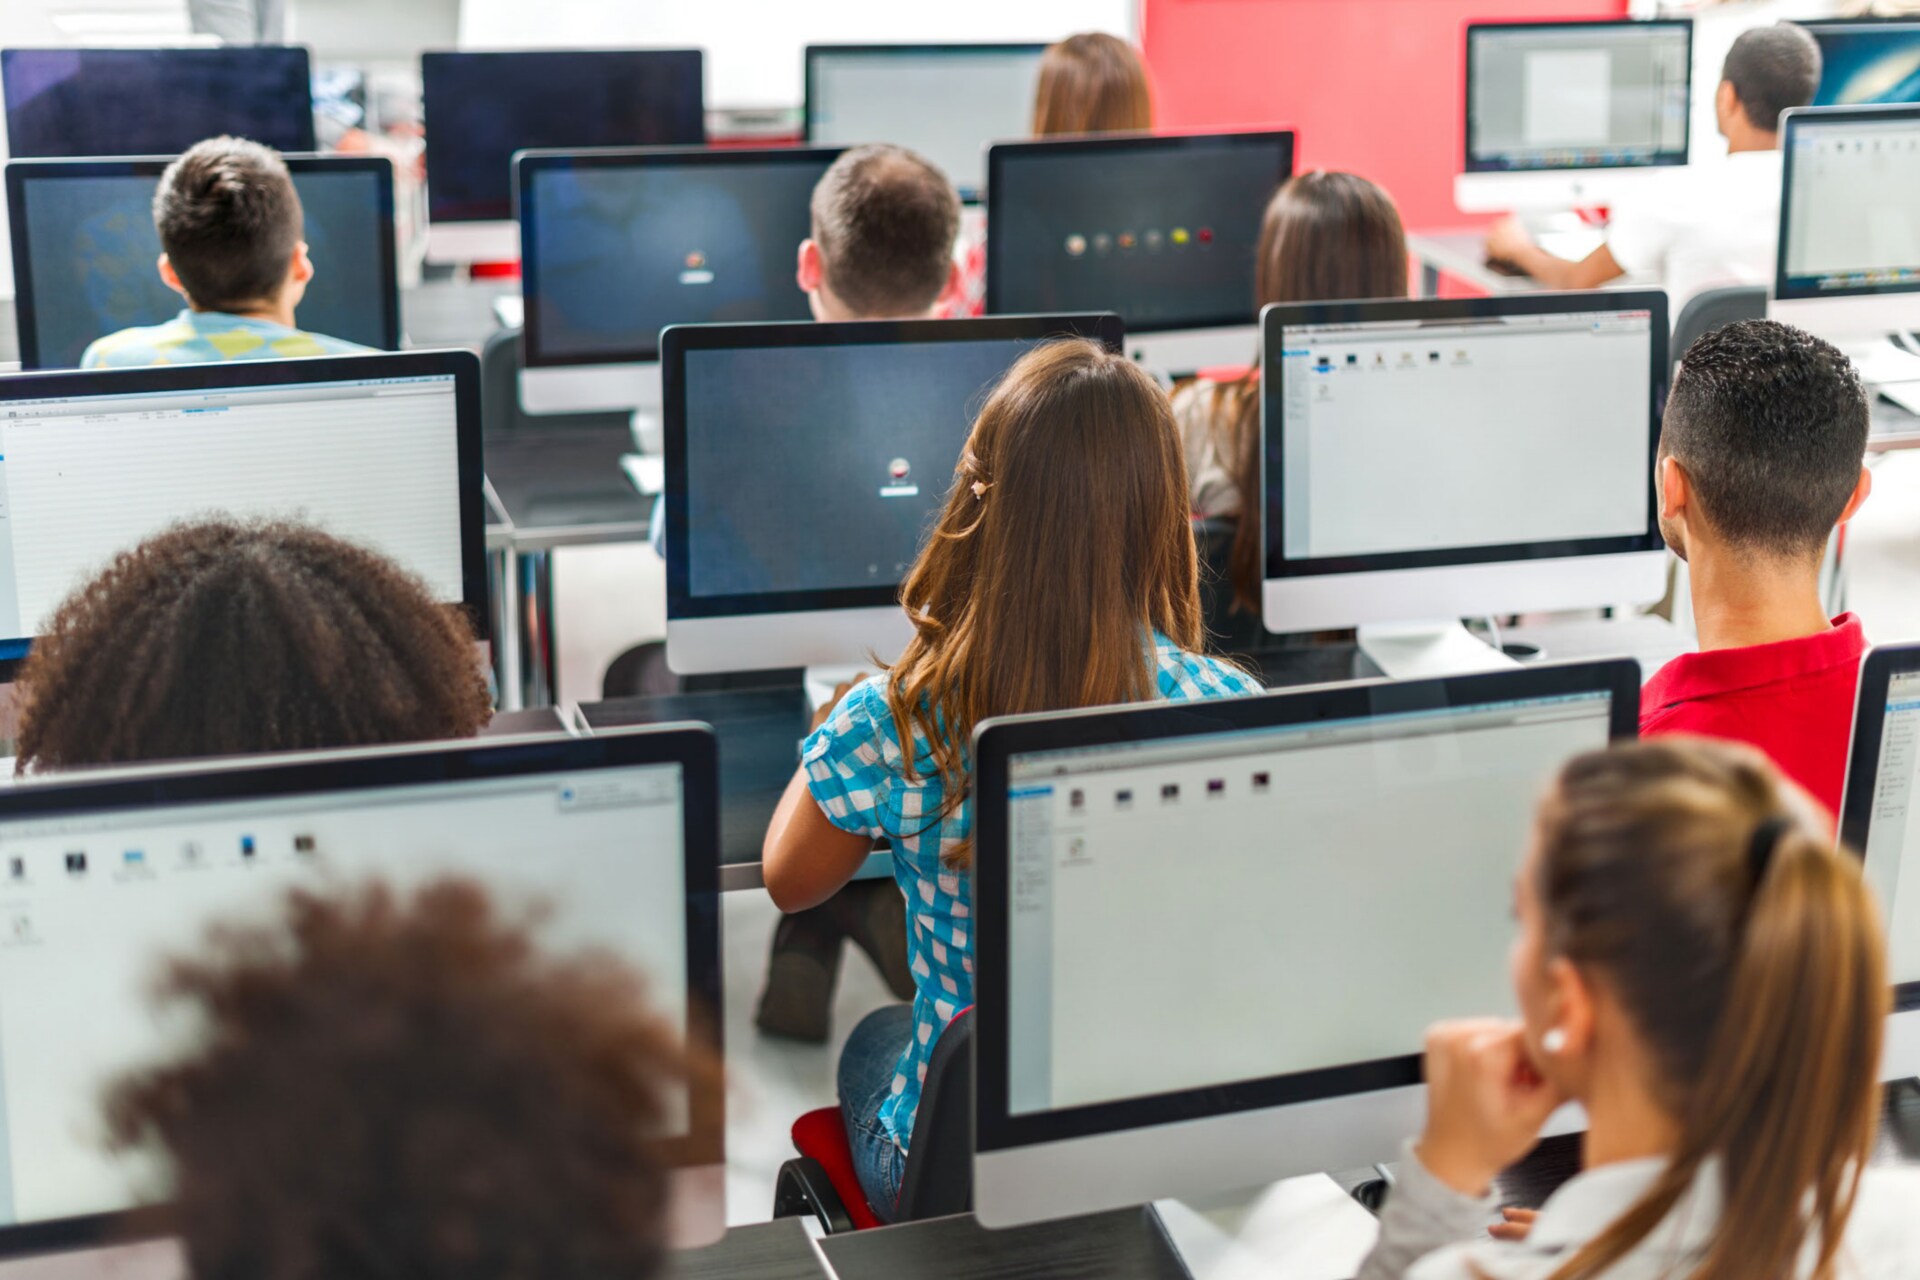 Wide shot of children at school in a computer lab learning.